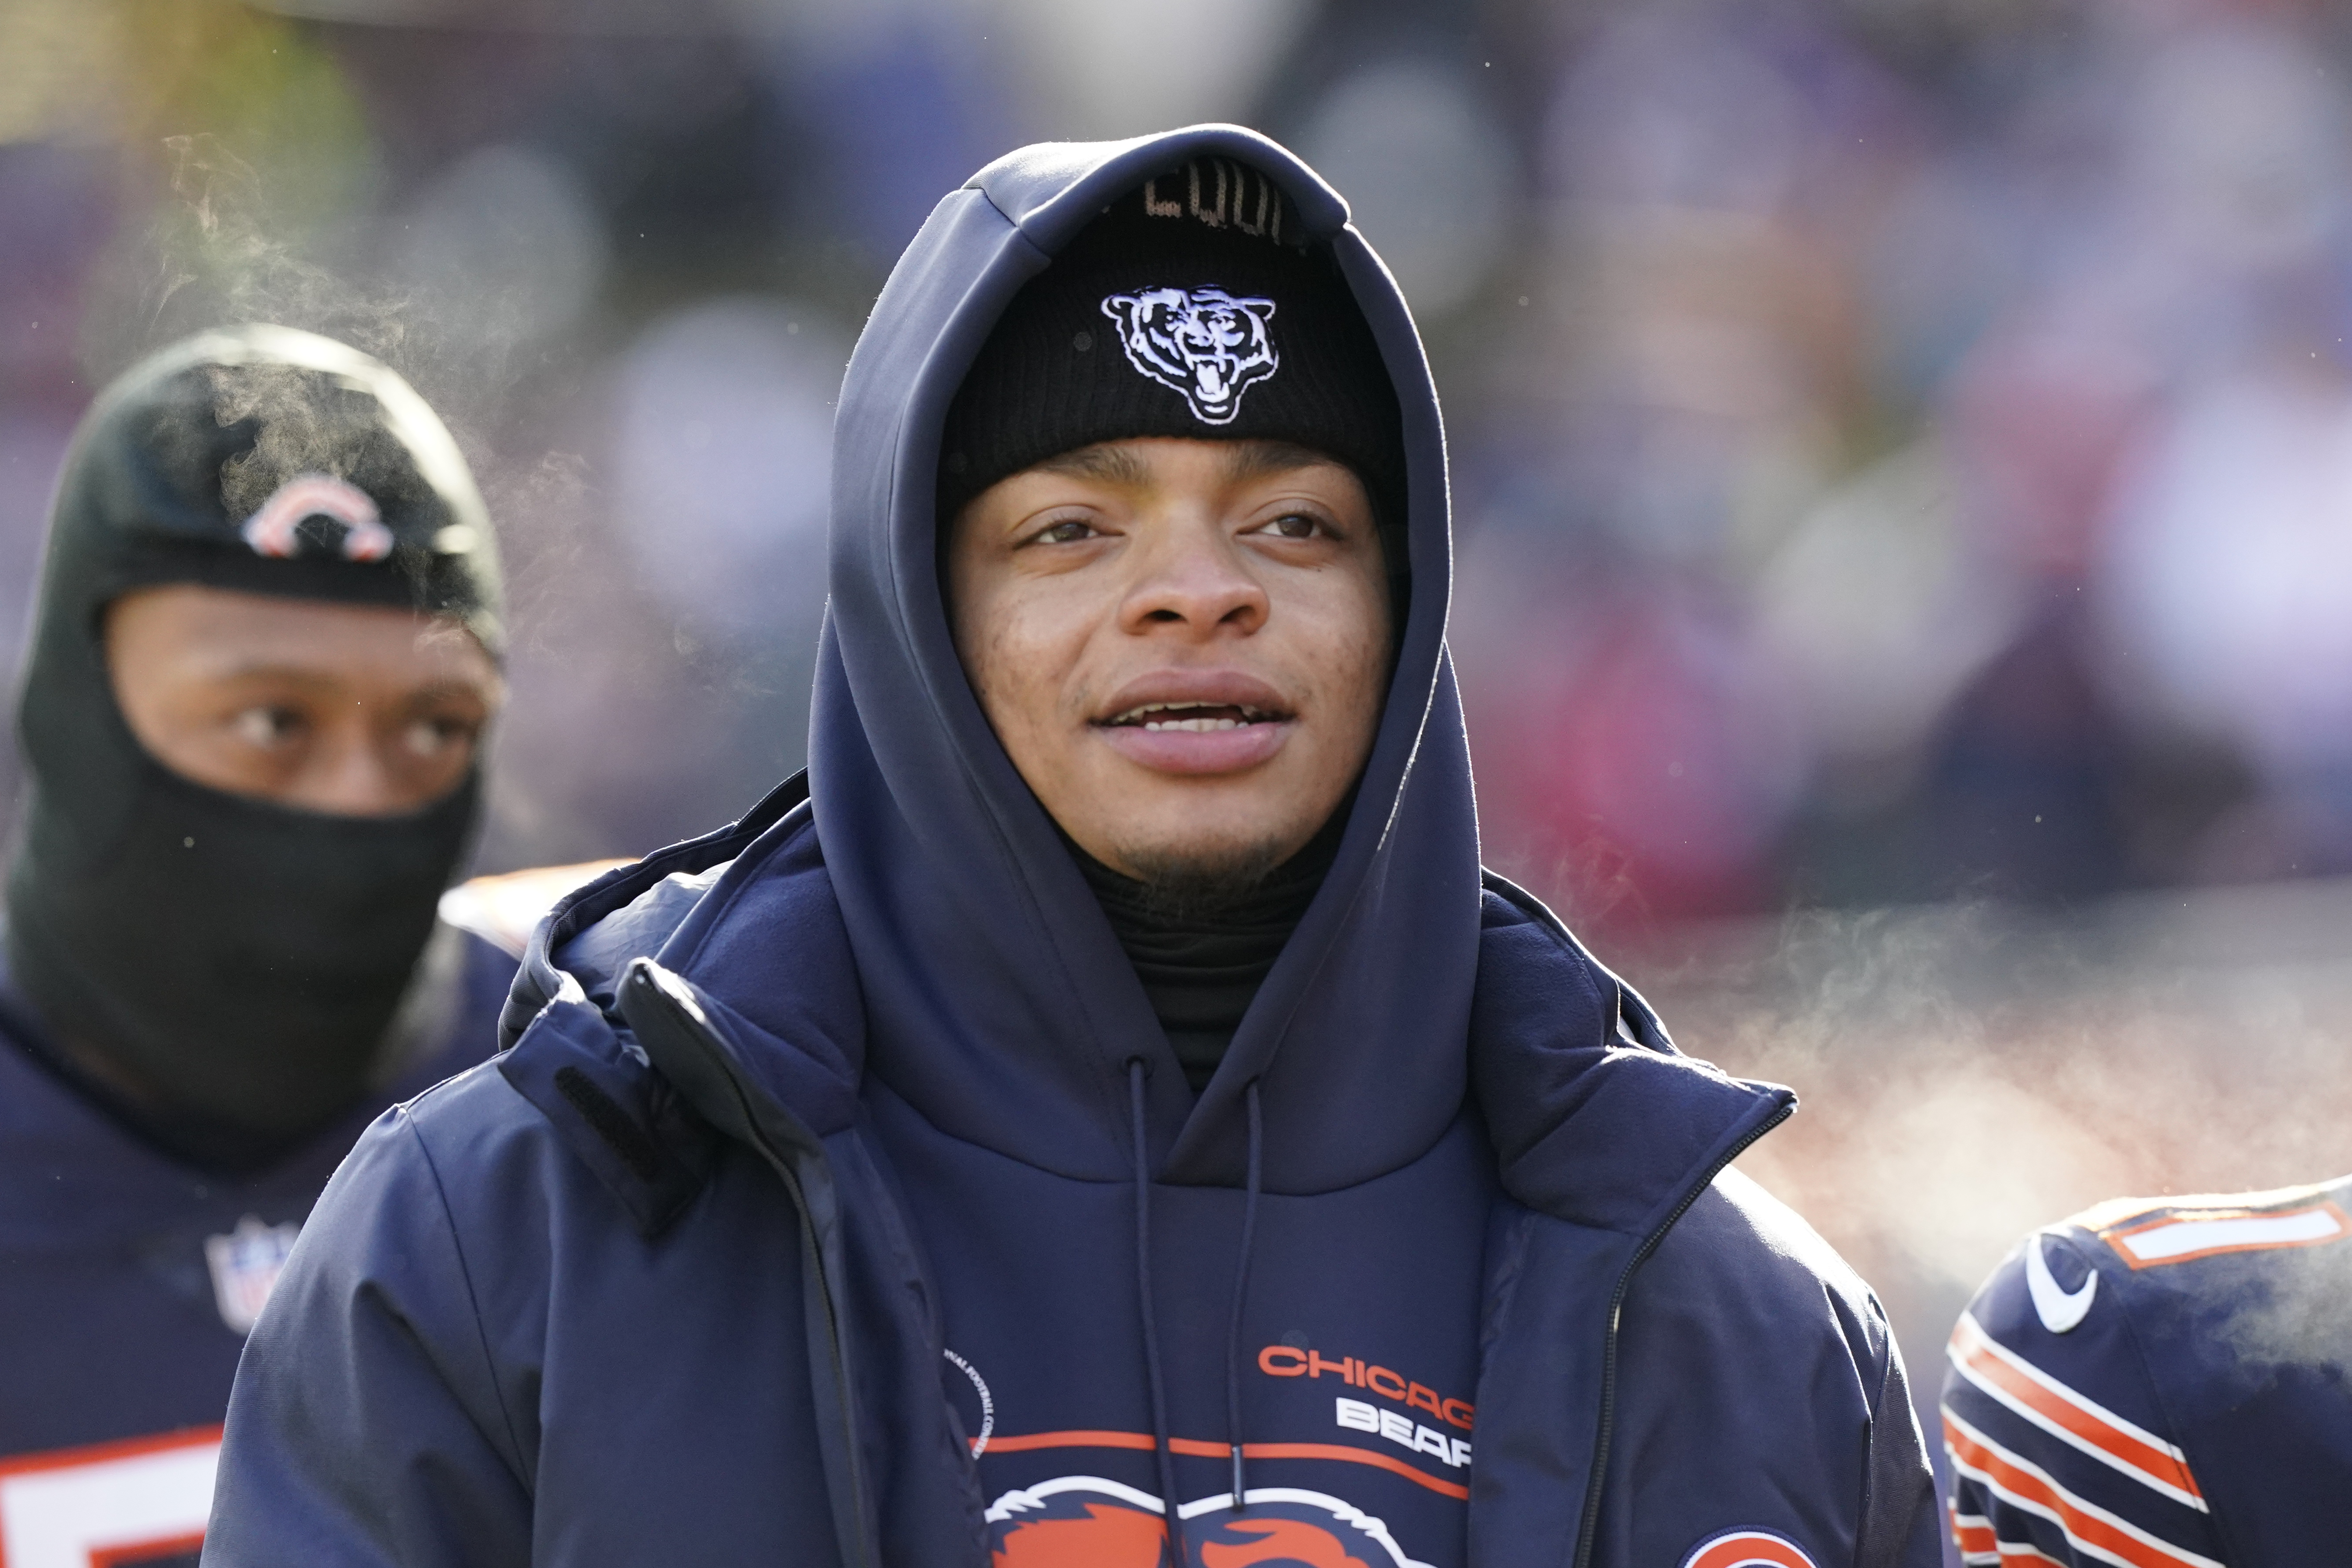 NFL Coach: Bears Are 'Very Desirable' Due to Roster, Potential to Trade Justin Fields